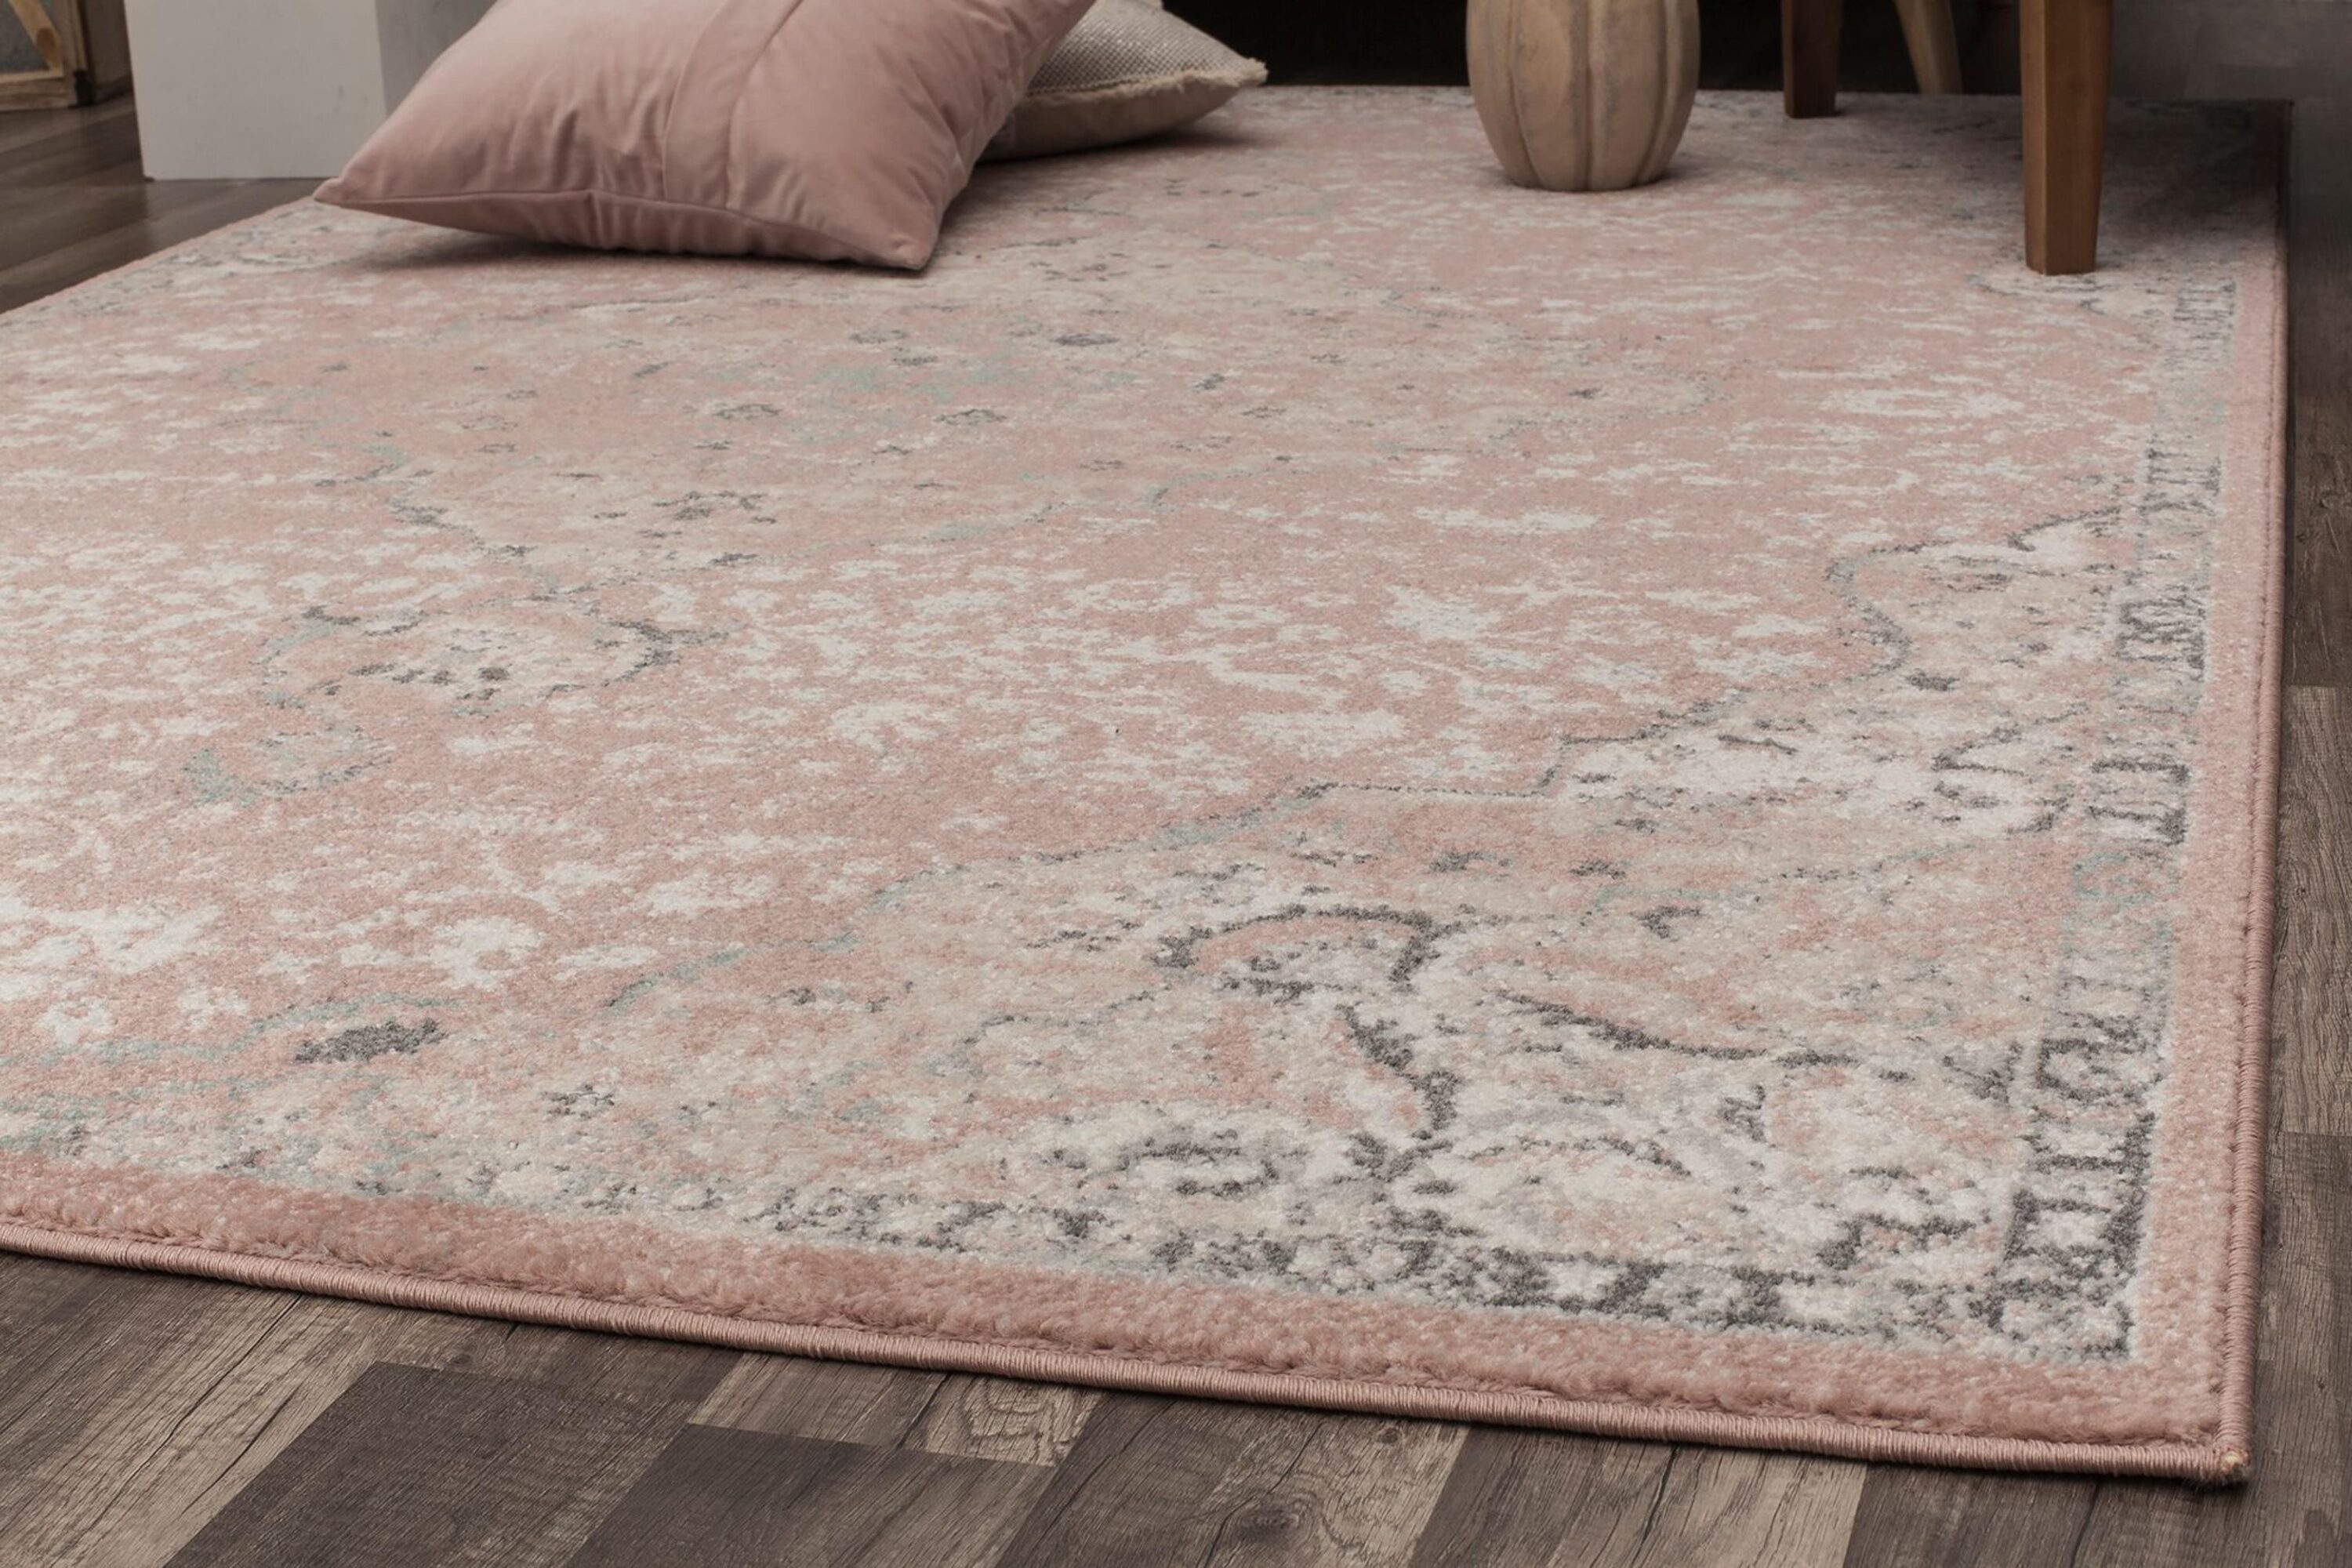 Rugs America Hailey Pink Amaranth 8x10 Rug - Soil and Stain